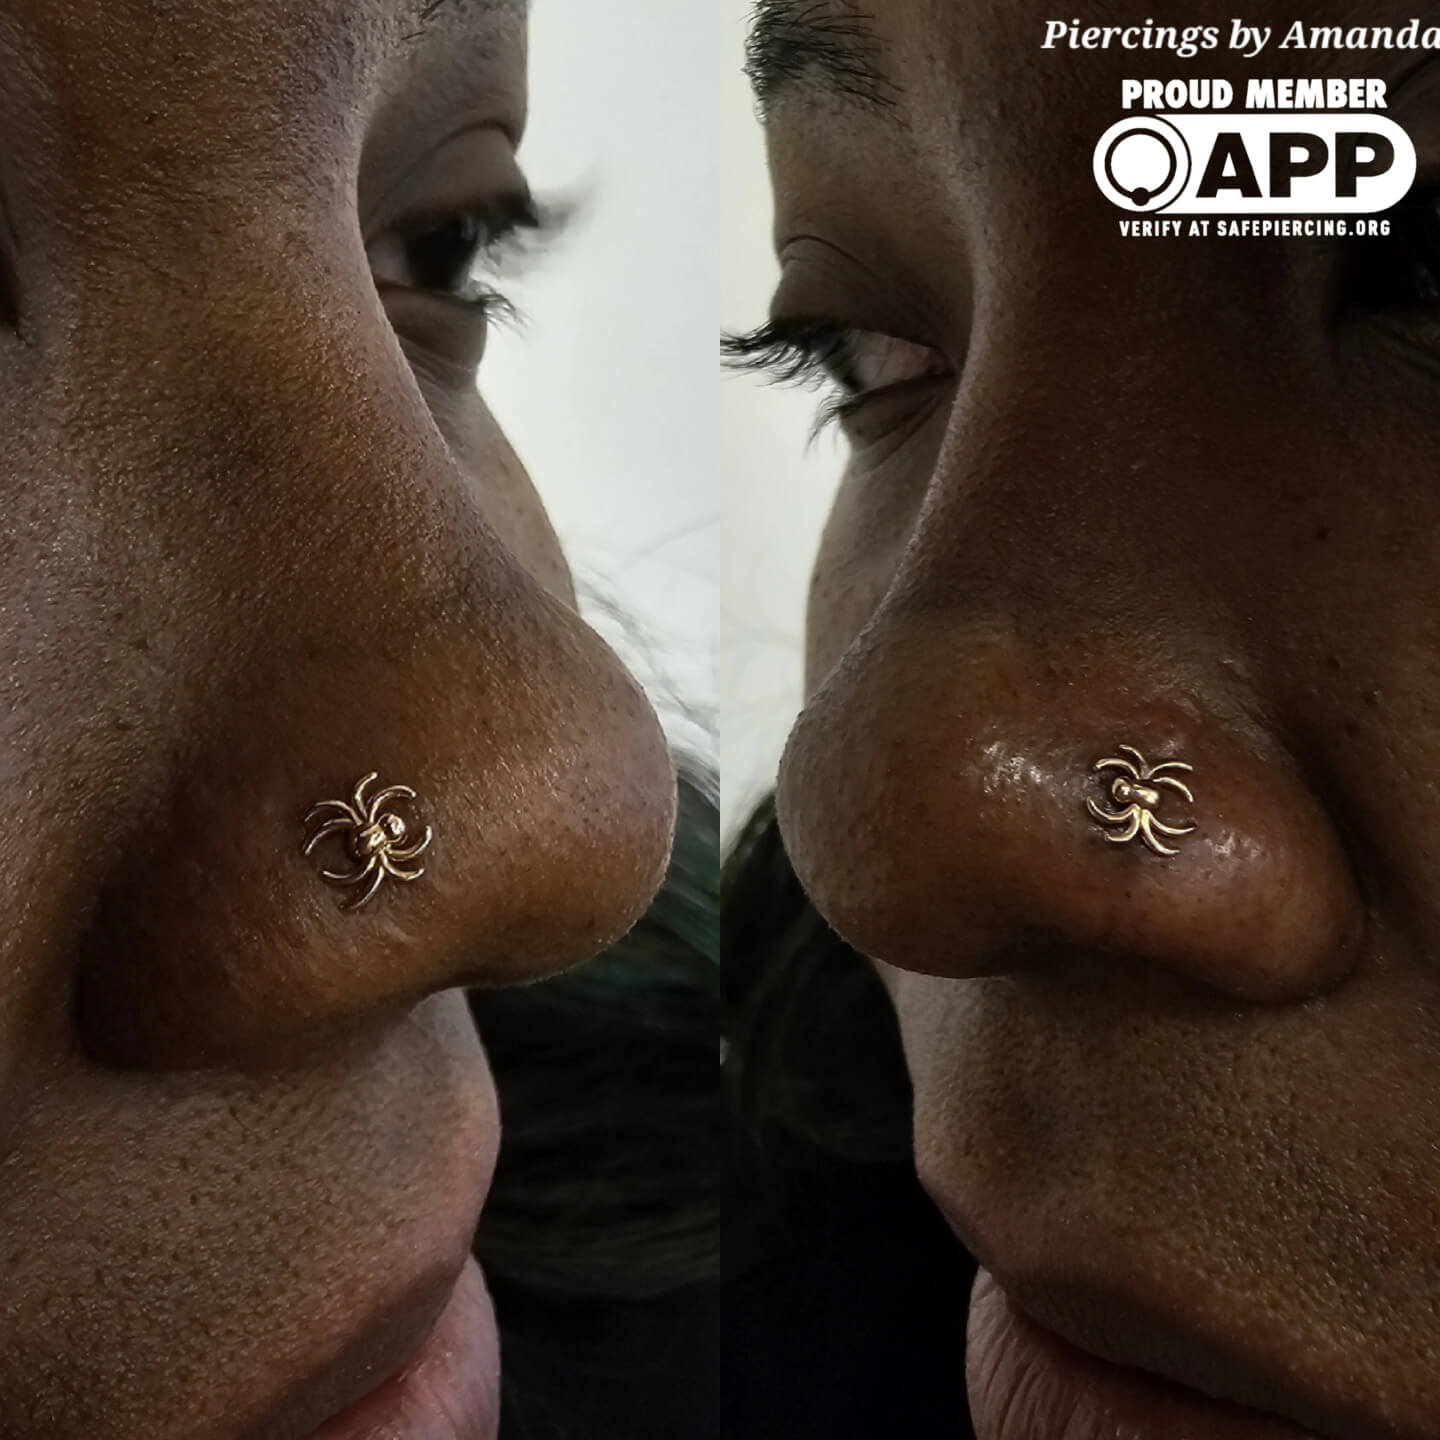 One healed and one fresh nostril piercings with gold spider